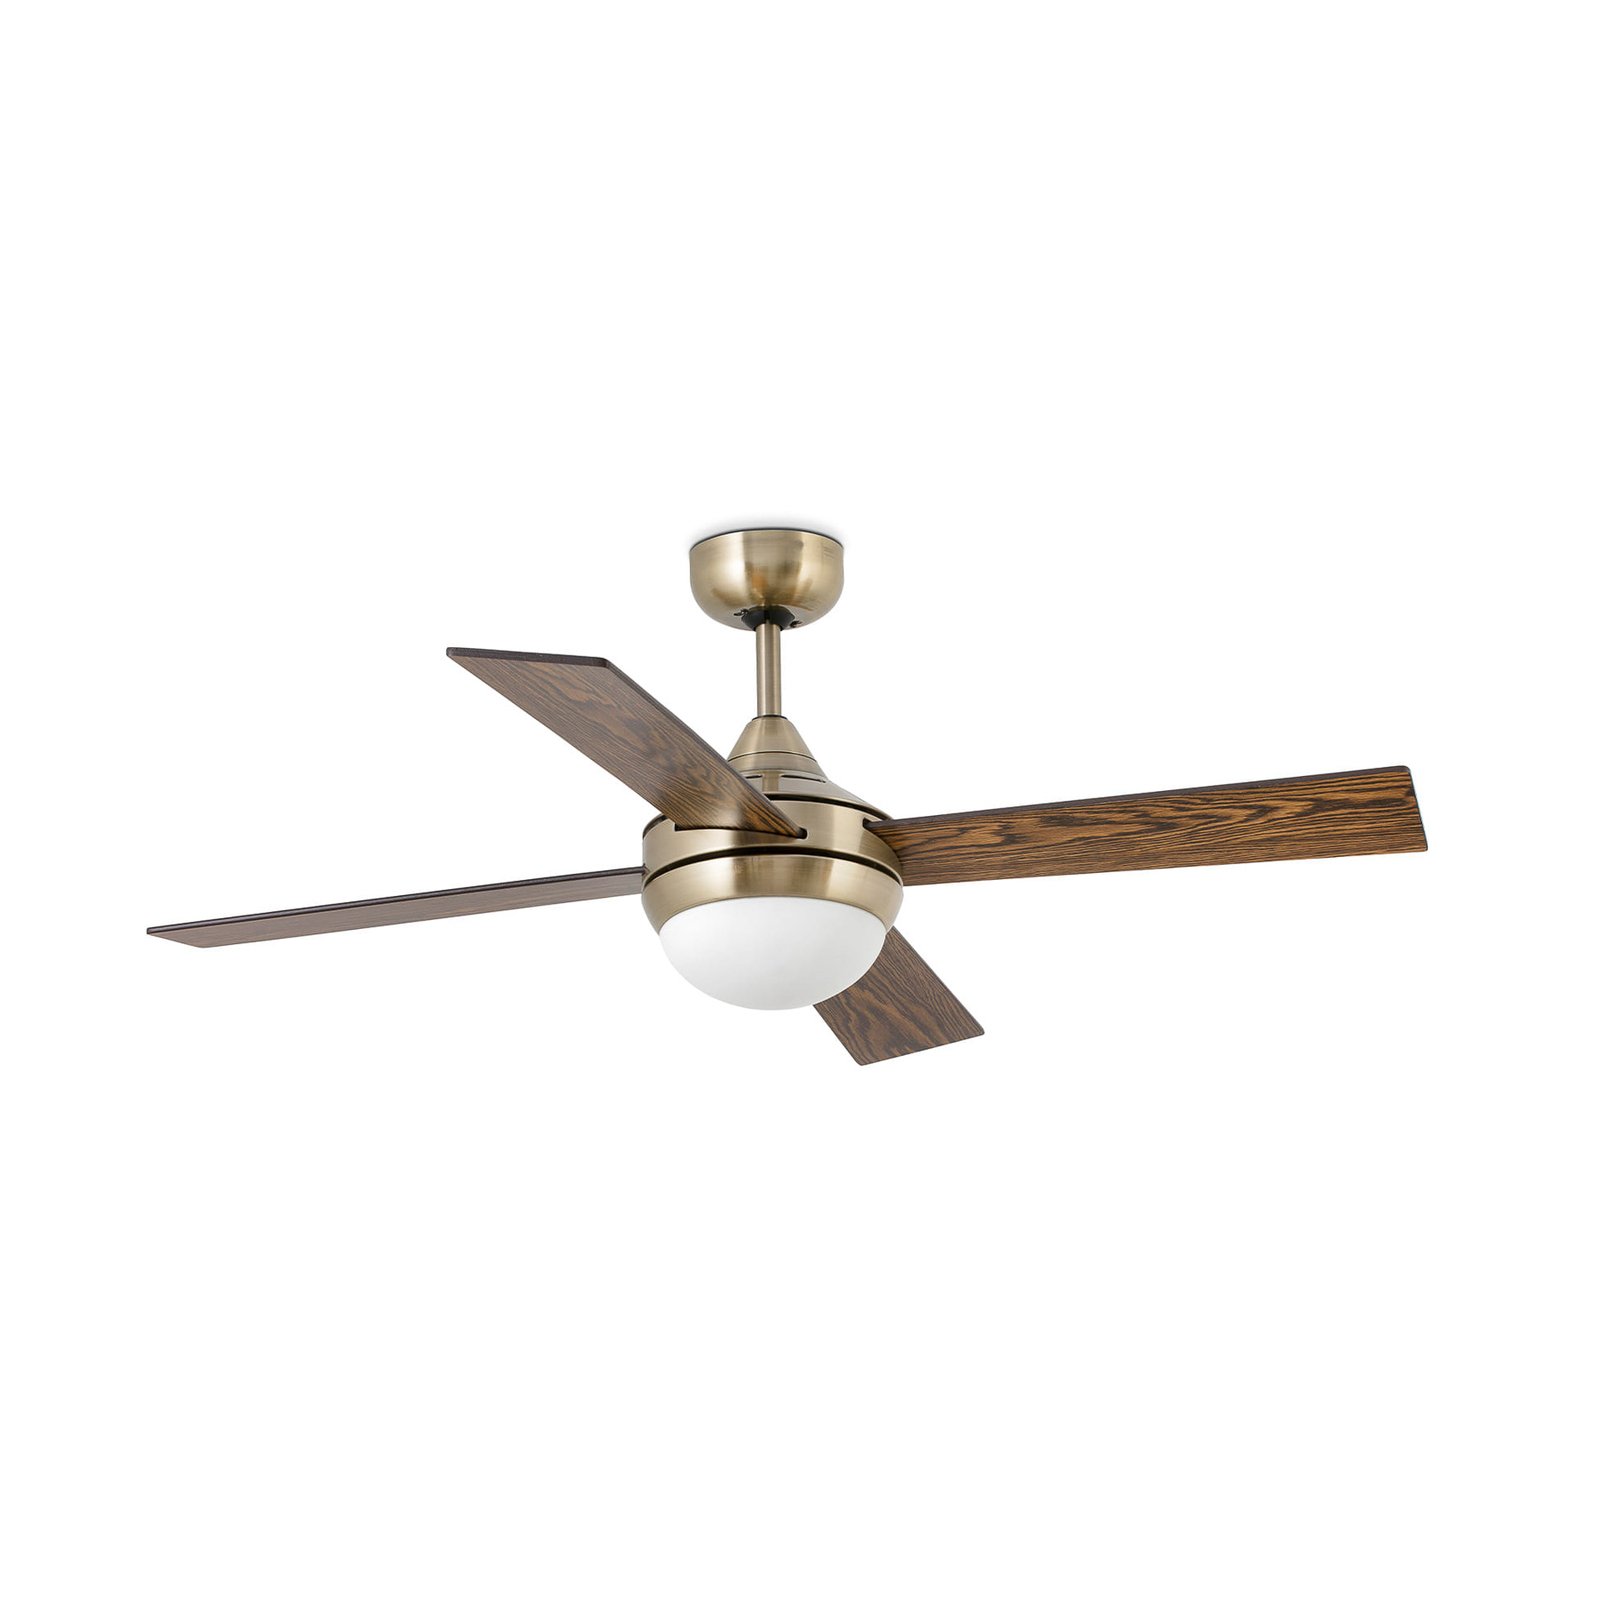 Mini Icaria S ceiling fan light old gold